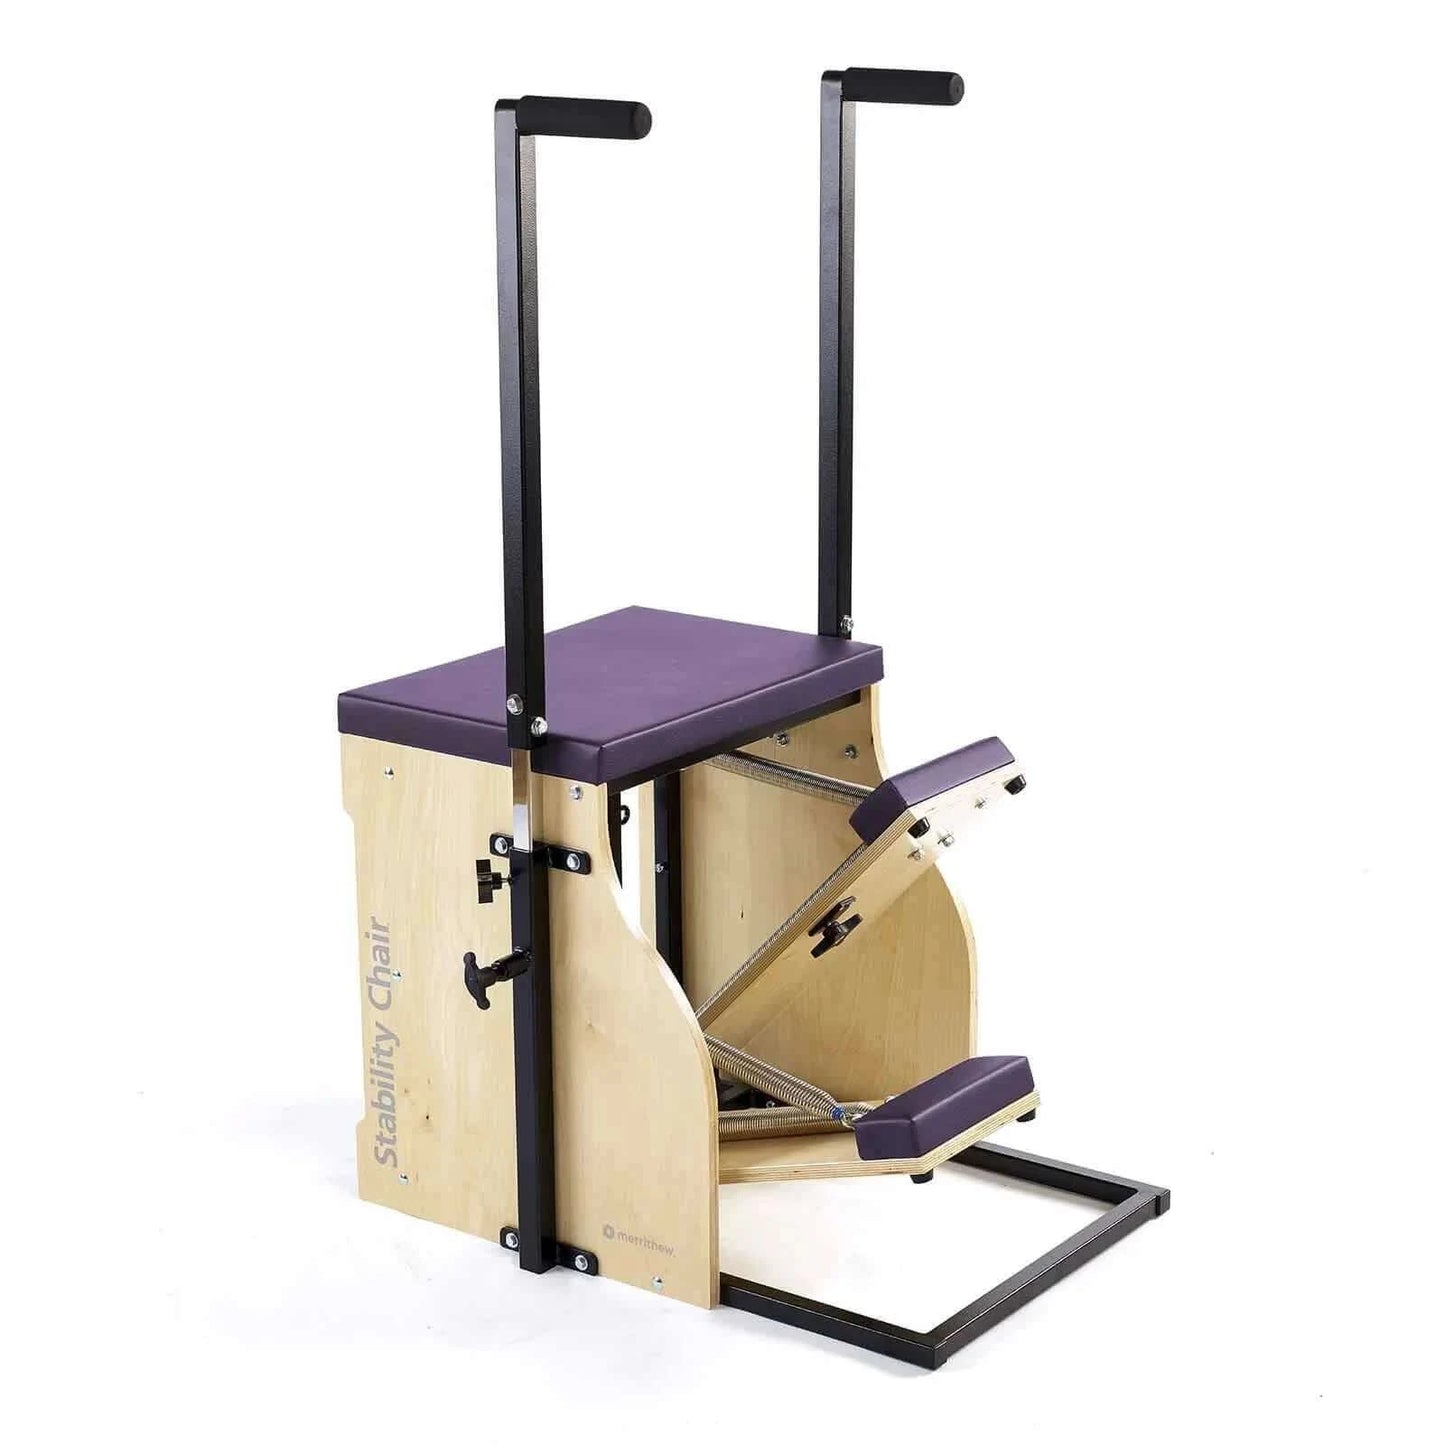 Purple Impulse Merrithew™ Pilates Split-Pedal Stability Chair™ by Merrithew™ sold by Pilates Matters® by BSP LLC